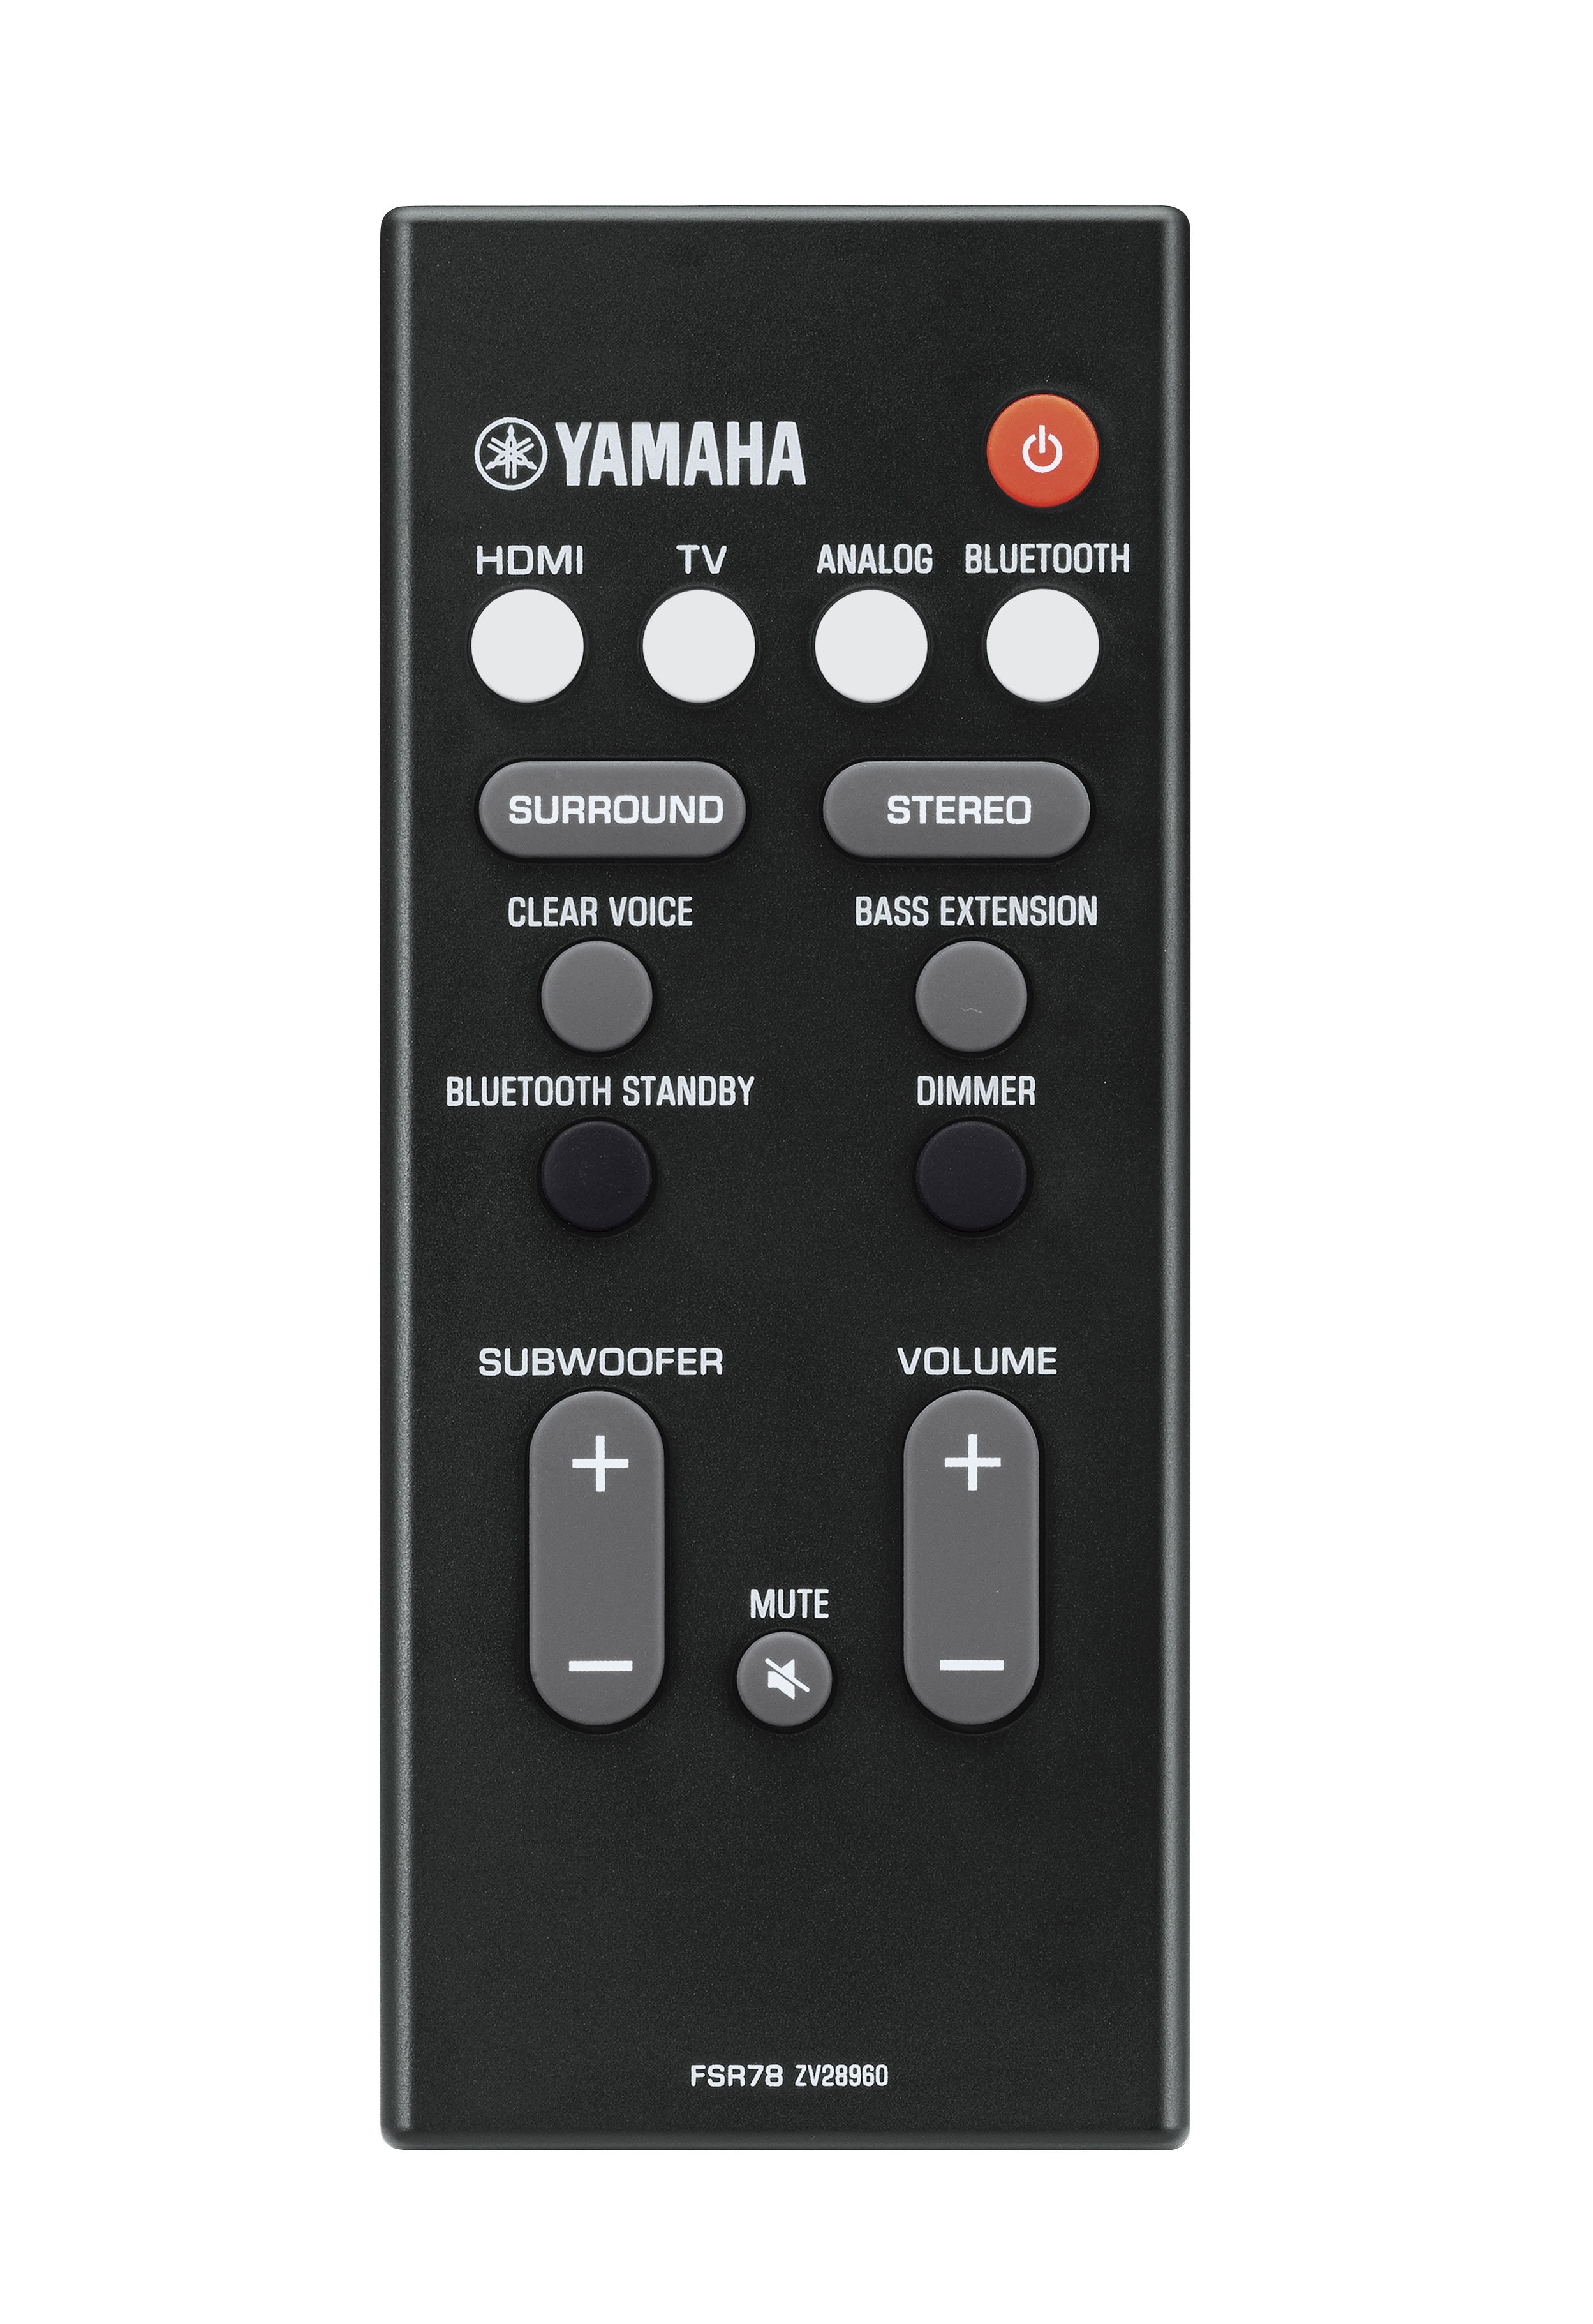 YAS-107 - Overview - Sound Bars - Audio & Visual - Products 